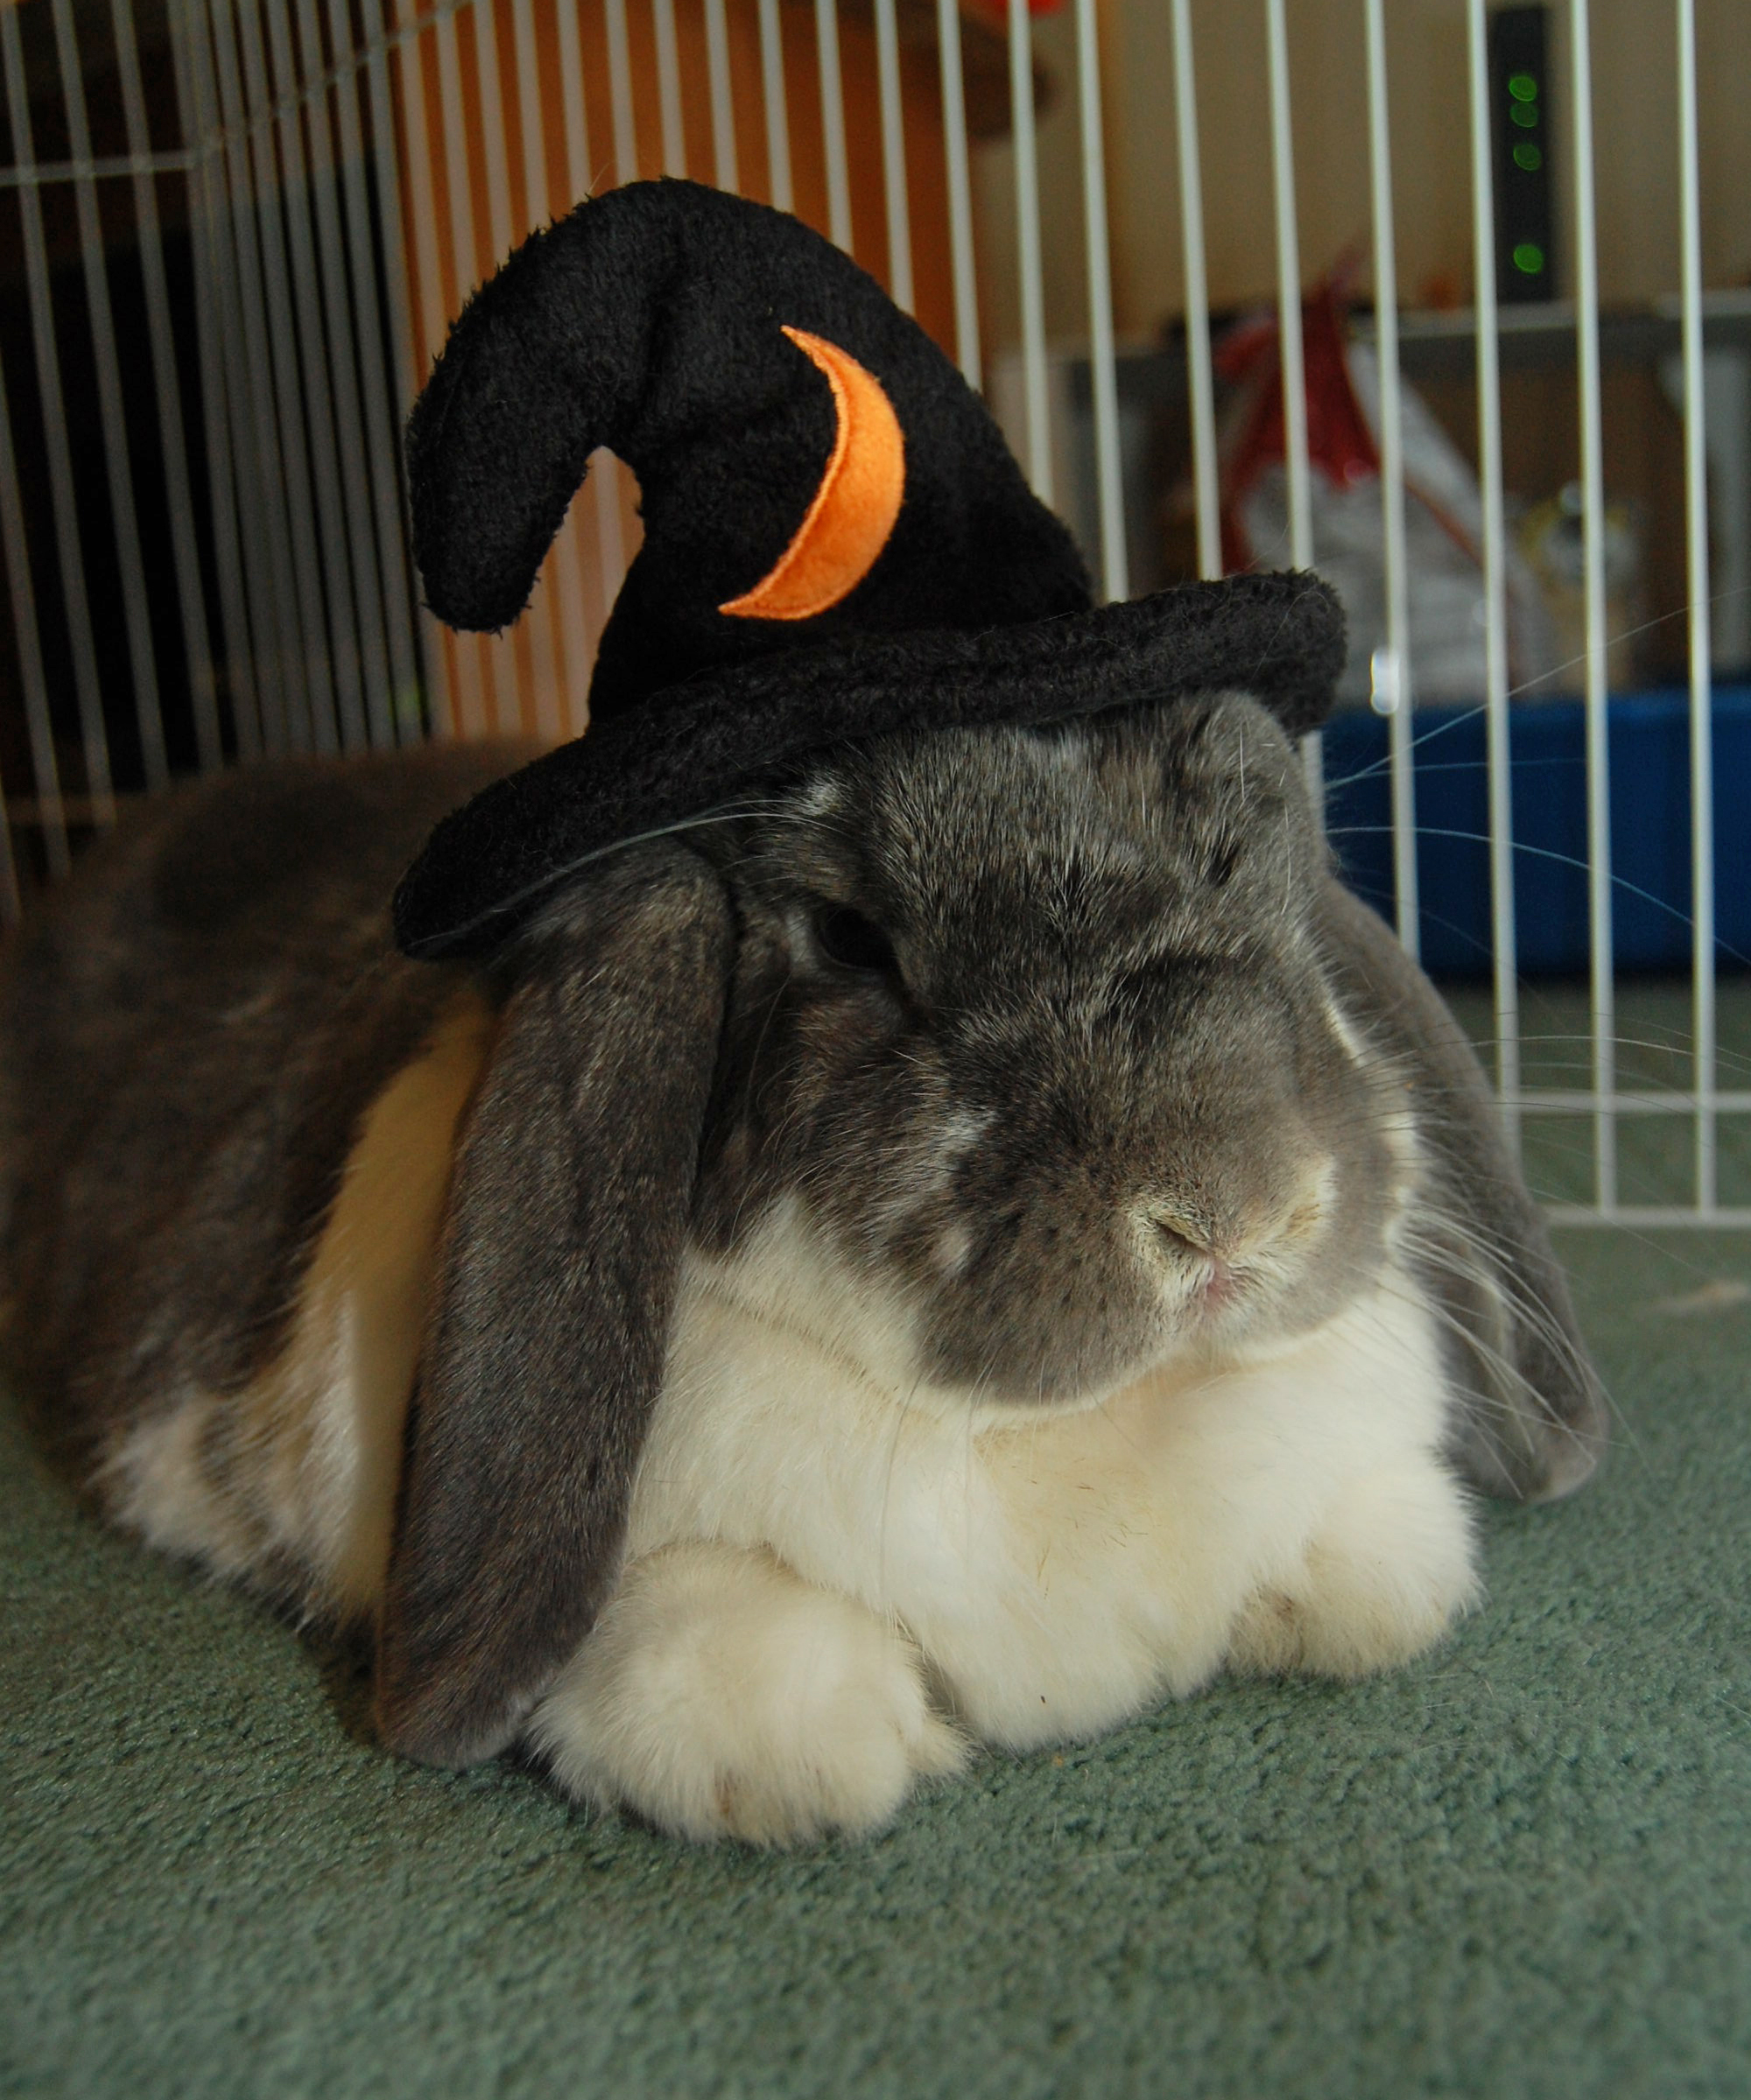 Bunny Is a Wizard for Halloween